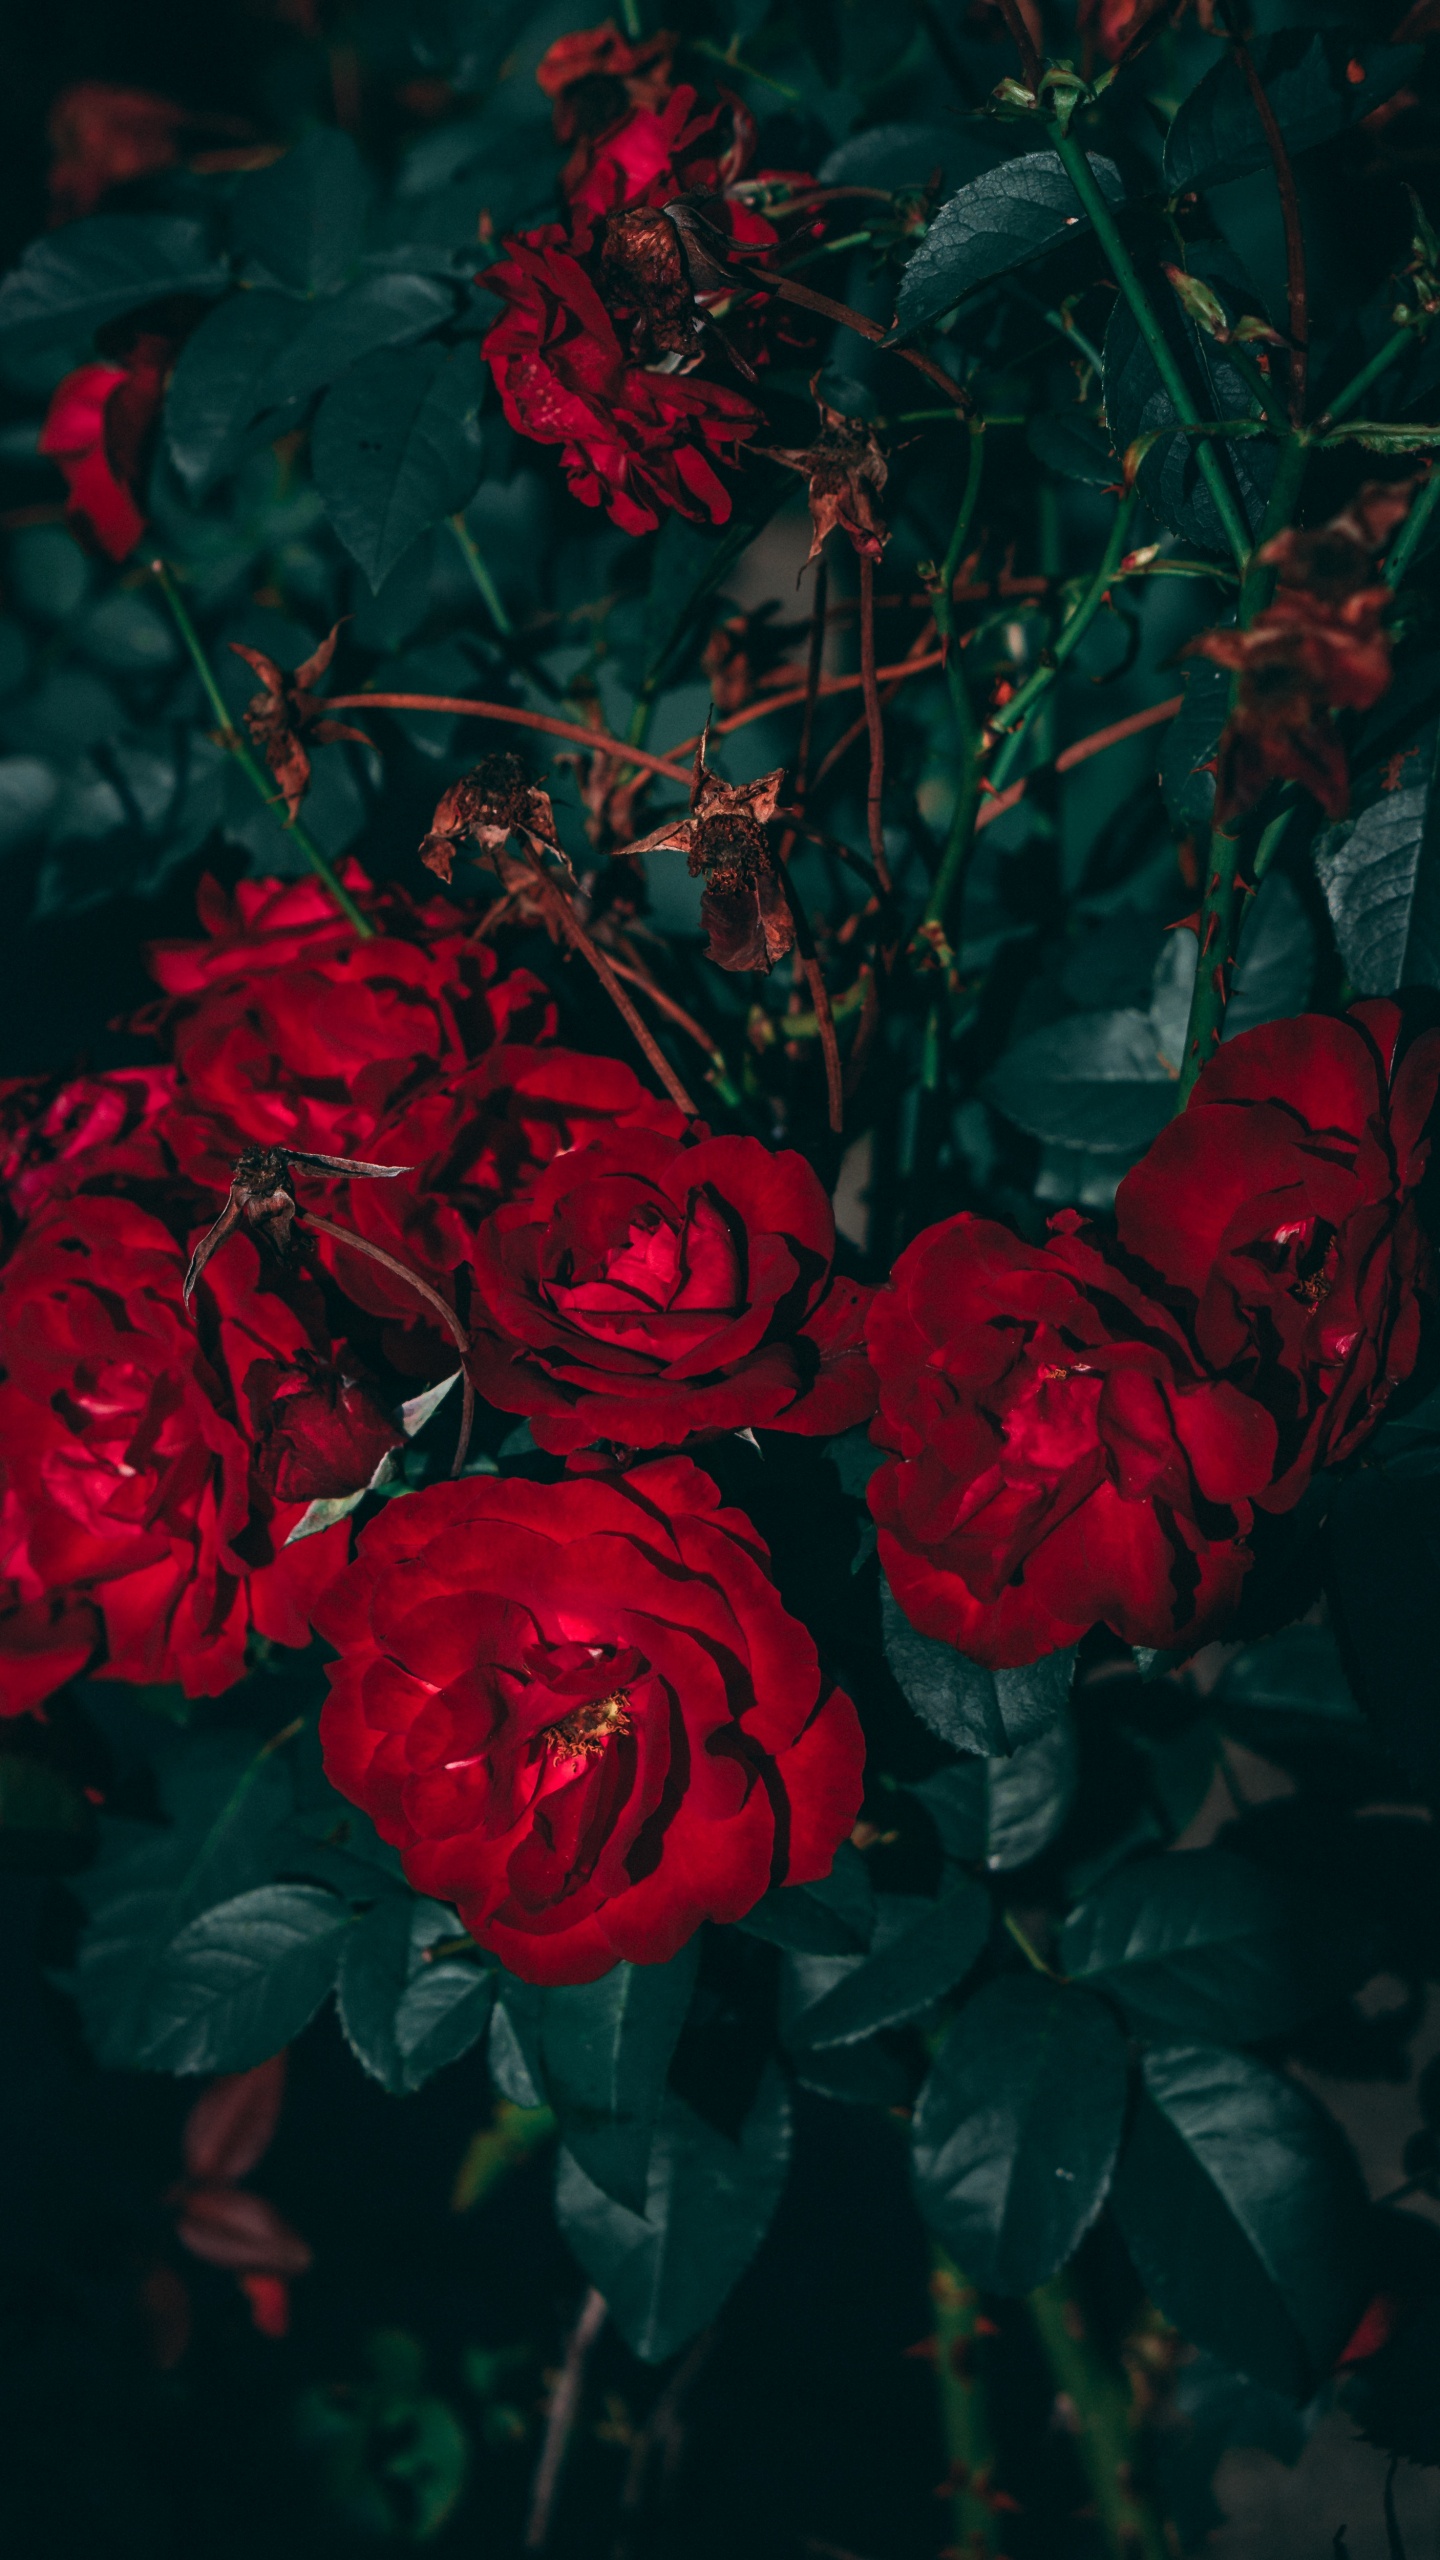 Roses Rouges en Photographie Rapprochée. Wallpaper in 1440x2560 Resolution